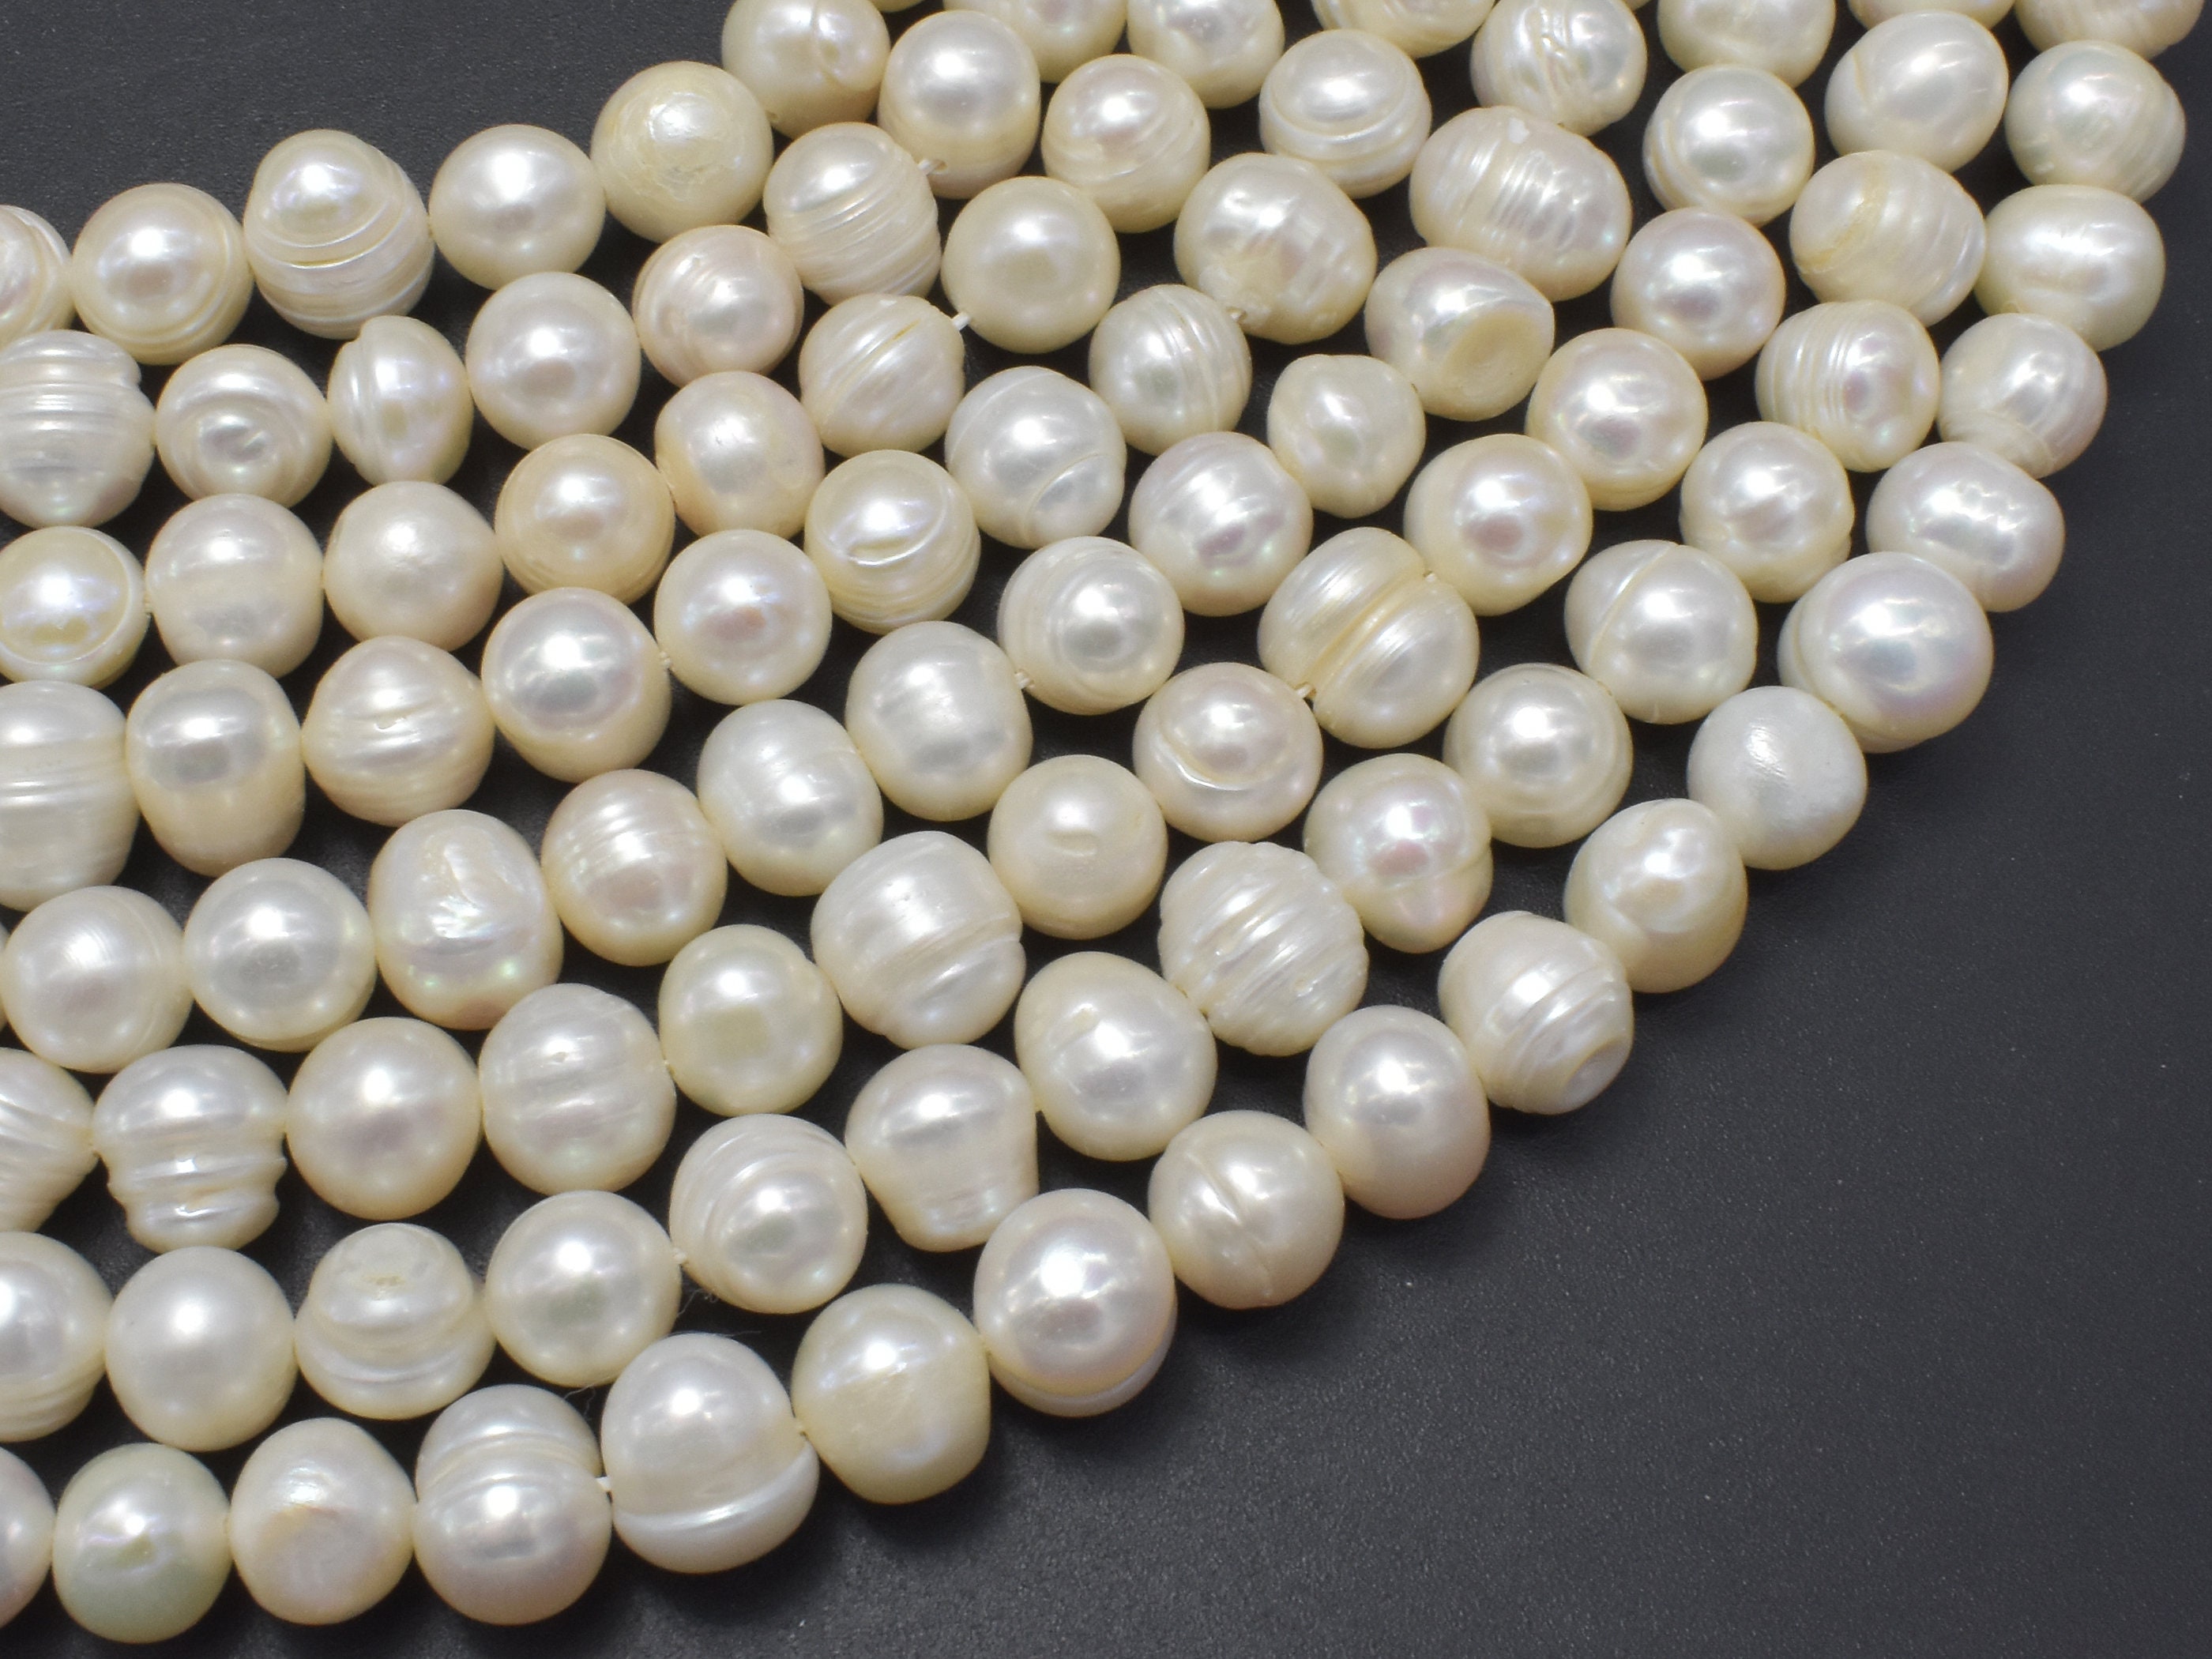 Rice Pearl Beads 5 to 7mm long and approx. 4mm wide, Fresh Water Natural Pearl  Strands 13.5inch Long, Wholesale rates, Bulk Pricing options